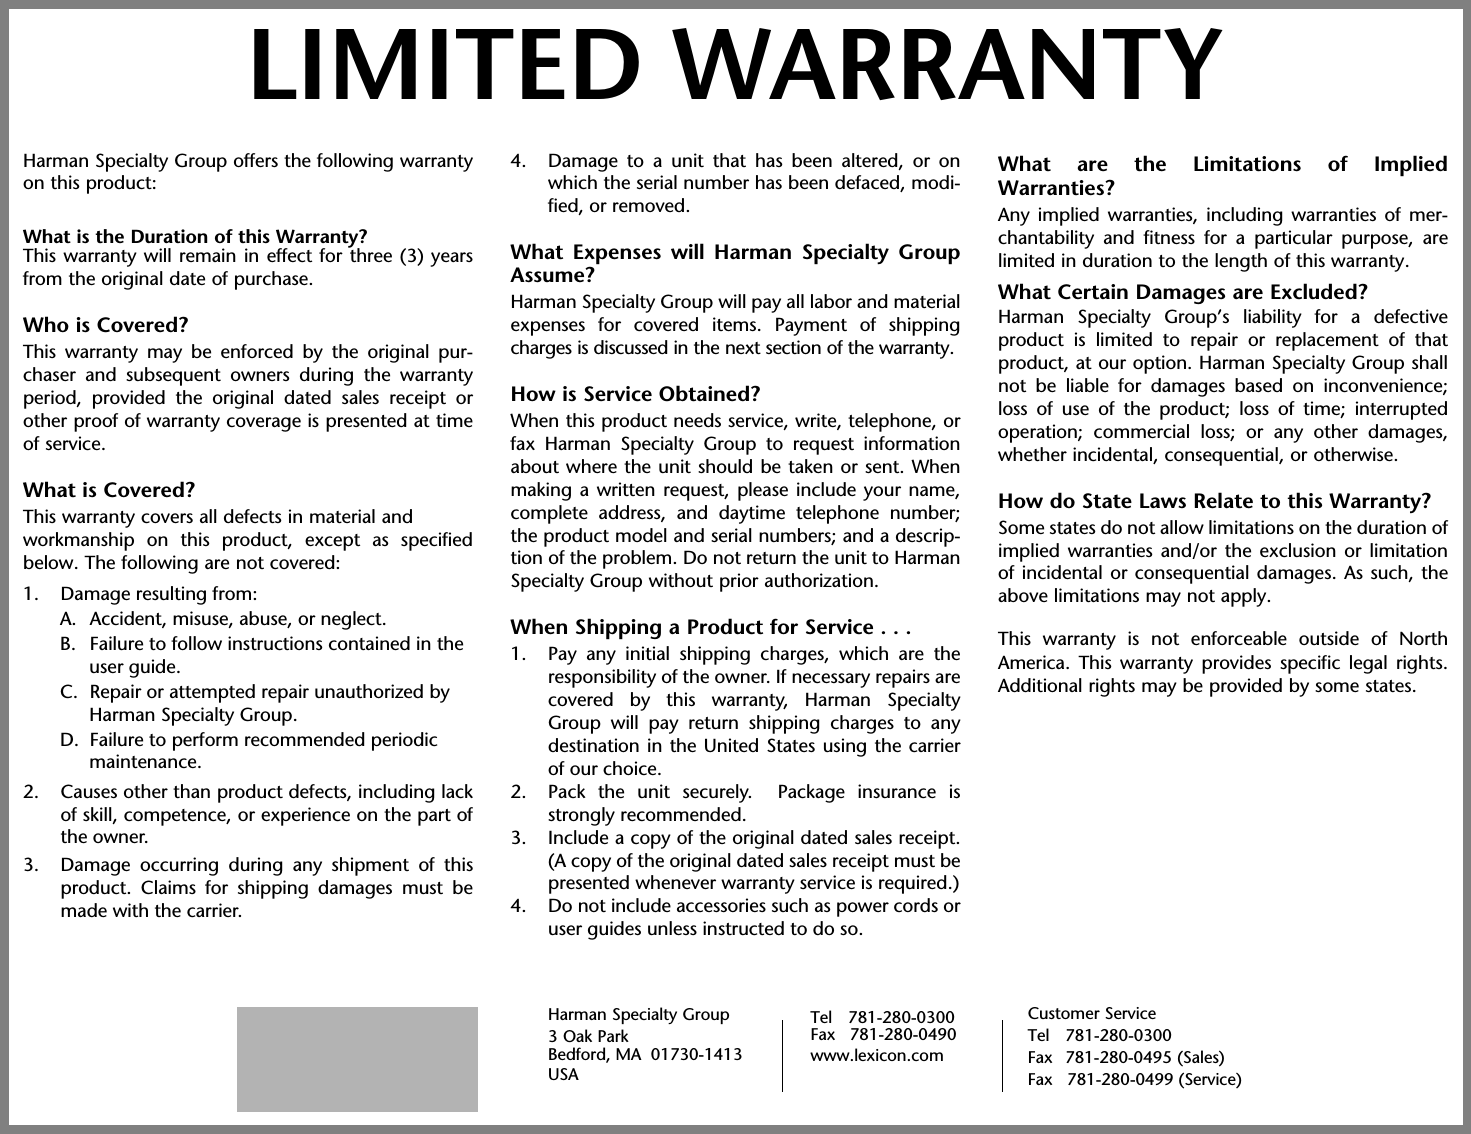 Harman Specialty Group offers the following warrantyon this product:What is the Duration of this Warranty?This warranty will remain in effect for three (3) yearsfrom the original date of purchase.Who is Covered?This warranty may be enforced by the original pur-chaser and subsequent owners during the warrantyperiod, provided the original dated sales receipt orother proof of warranty coverage is presented at timeof service.What is Covered?This warranty covers all defects in material andworkmanship on this product, except as specifiedbelow. The following are not covered:1. Damage resulting from:A. Accident, misuse, abuse, or neglect.B. Failure to follow instructions contained in the user guide.C. Repair or attempted repair unauthorized by Harman Specialty Group.D. Failure to perform recommended periodic maintenance.2. Causes other than product defects, including lackof skill, competence, or experience on the part ofthe owner.3. Damage occurring during any shipment of thisproduct. Claims for shipping damages must bemade with the carrier.4. Damage to a unit that has been altered, or onwhich the serial number has been defaced, modi-fied, or removed.What Expenses will Harman Specialty GroupAssume?Harman Specialty Group will pay all labor and materialexpenses for covered items. Payment of shippingcharges is discussed in the next section of the warranty.How is Service Obtained?When this product needs service, write, telephone, orfax Harman Specialty Group to request informationabout where the unit should be taken or sent. Whenmaking a written request, please include your name,complete address, and daytime telephone number;the product model and serial numbers; and a descrip-tion of the problem. Do not return the unit to HarmanSpecialty Group without prior authorization.When Shipping a Product for Service . . .1. Pay any initial shipping charges, which are theresponsibility of the owner. If necessary repairs arecovered by this warranty, Harman SpecialtyGroup will pay return shipping charges to anydestination in the United States using the carrierof our choice.2. Pack the unit securely.  Package insurance isstrongly recommended.3. Include a copy of the original dated sales receipt.(A copy of the original dated sales receipt must bepresented whenever warranty service is required.)4. Do not include accessories such as power cords oruser guides unless instructed to do so.What are the Limitations of ImpliedWarranties?Any implied warranties, including warranties of mer-chantability and fitness for a particular purpose, arelimited in duration to the length of this warranty.What Certain Damages are Excluded?Harman Specialty Group’s liability for a defectiveproduct is limited to repair or replacement of thatproduct, at our option. Harman Specialty Group shallnot be liable for damages based on inconvenience;loss of use of the product; loss of time; interruptedoperation; commercial loss; or any other damages,whether incidental, consequential, or otherwise.How do State Laws Relate to this Warranty?Some states do not allow limitations on the duration ofimplied warranties and/or the exclusion or limitationof incidental or consequential damages. As such, theabove limitations may not apply. This warranty is not enforceable outside of NorthAmerica. This warranty provides specific legal rights.Additional rights may be provided by some states.LIMITED WARRANTYHarman Specialty Group3 Oak ParkBedford, MA  01730-1413 USACustomer ServiceTel 781-280-0300Fax 781-280-0495 (Sales)Fax   781-280-0499 (Service)Tel 781-280-0300Fax   781-280-0490www.lexicon.com